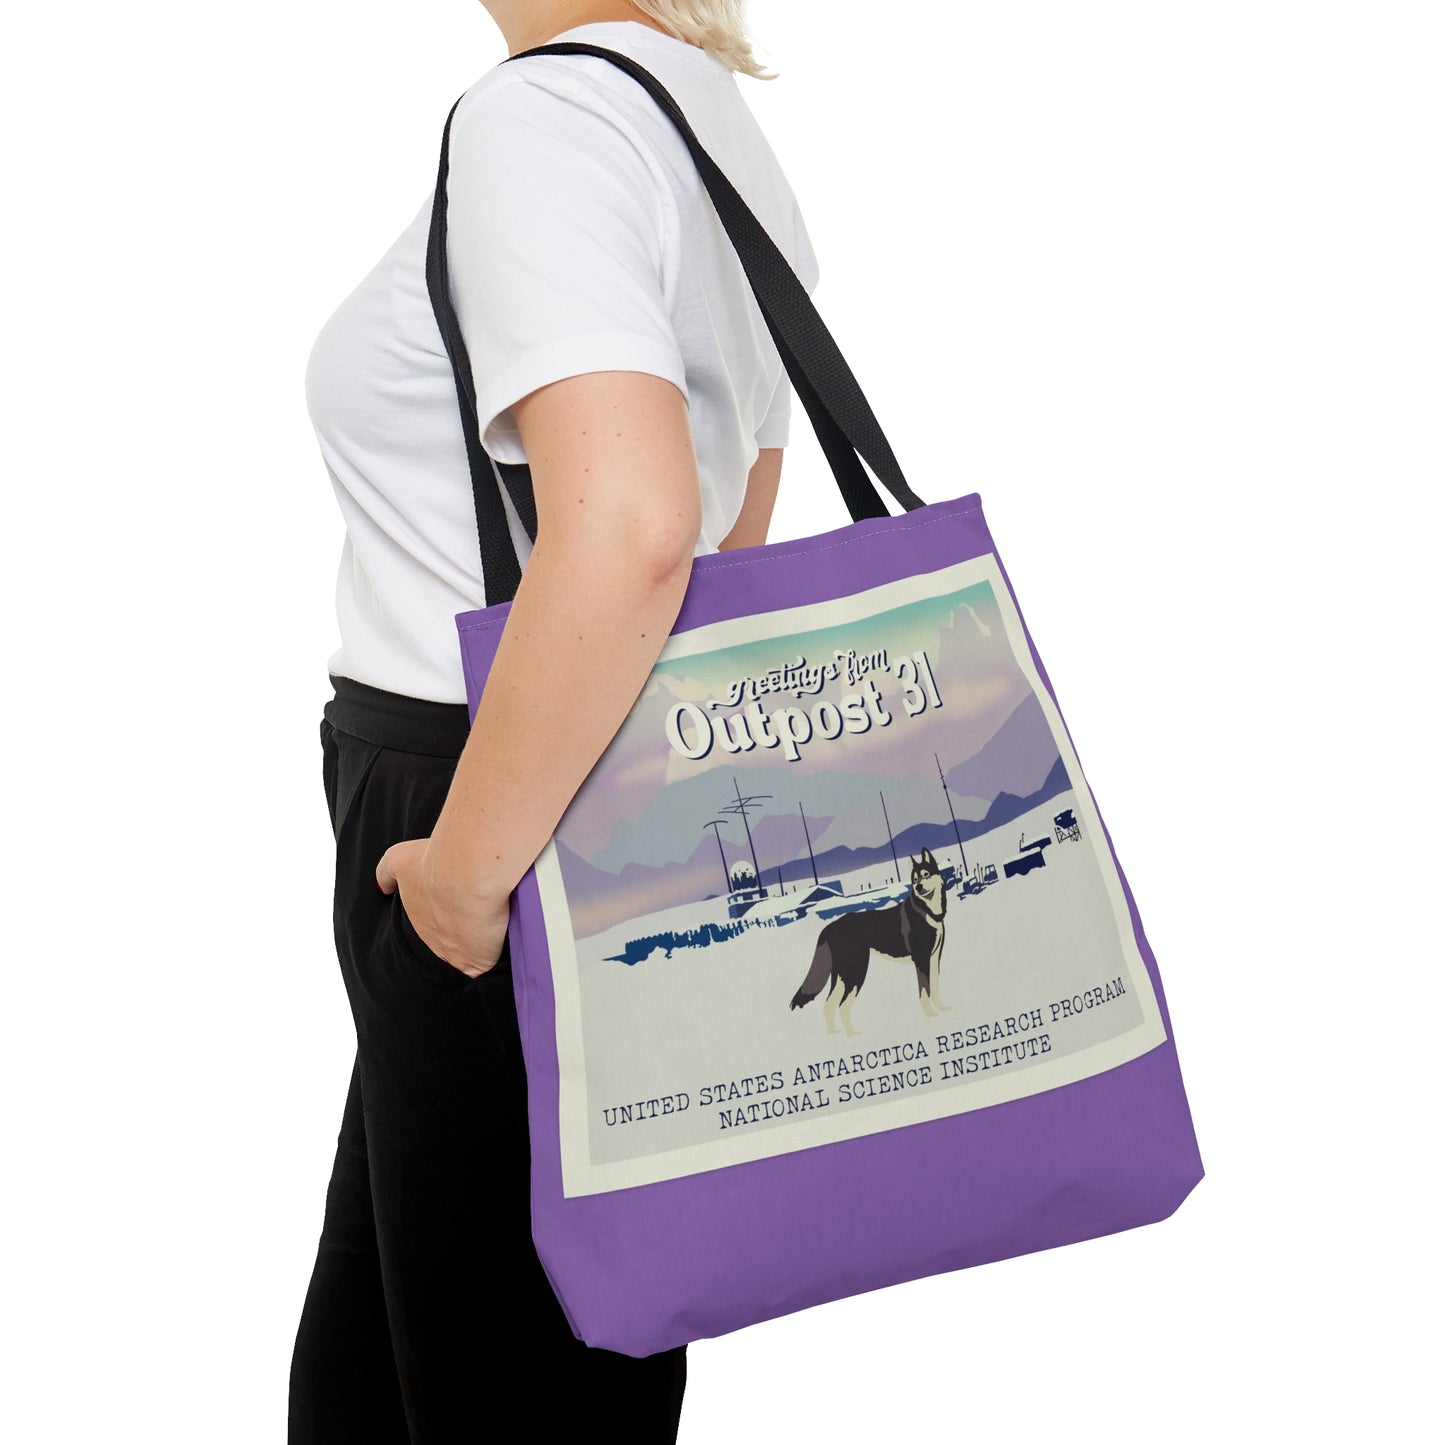 Outpost 31 Tote Bag (Color)